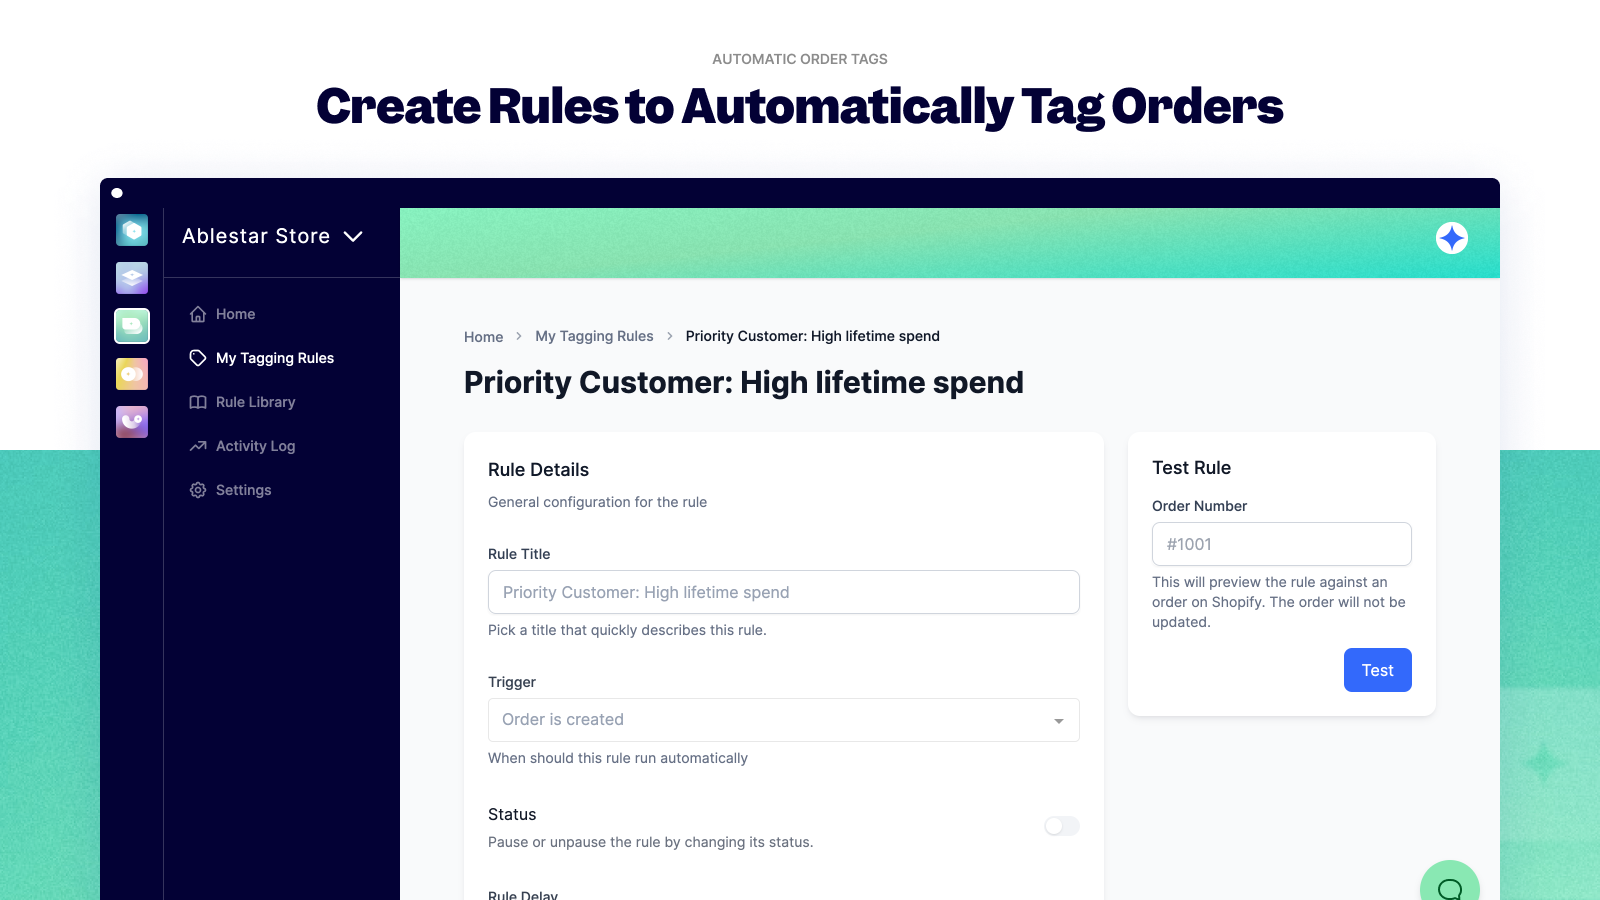 Create rules to auto tag orders